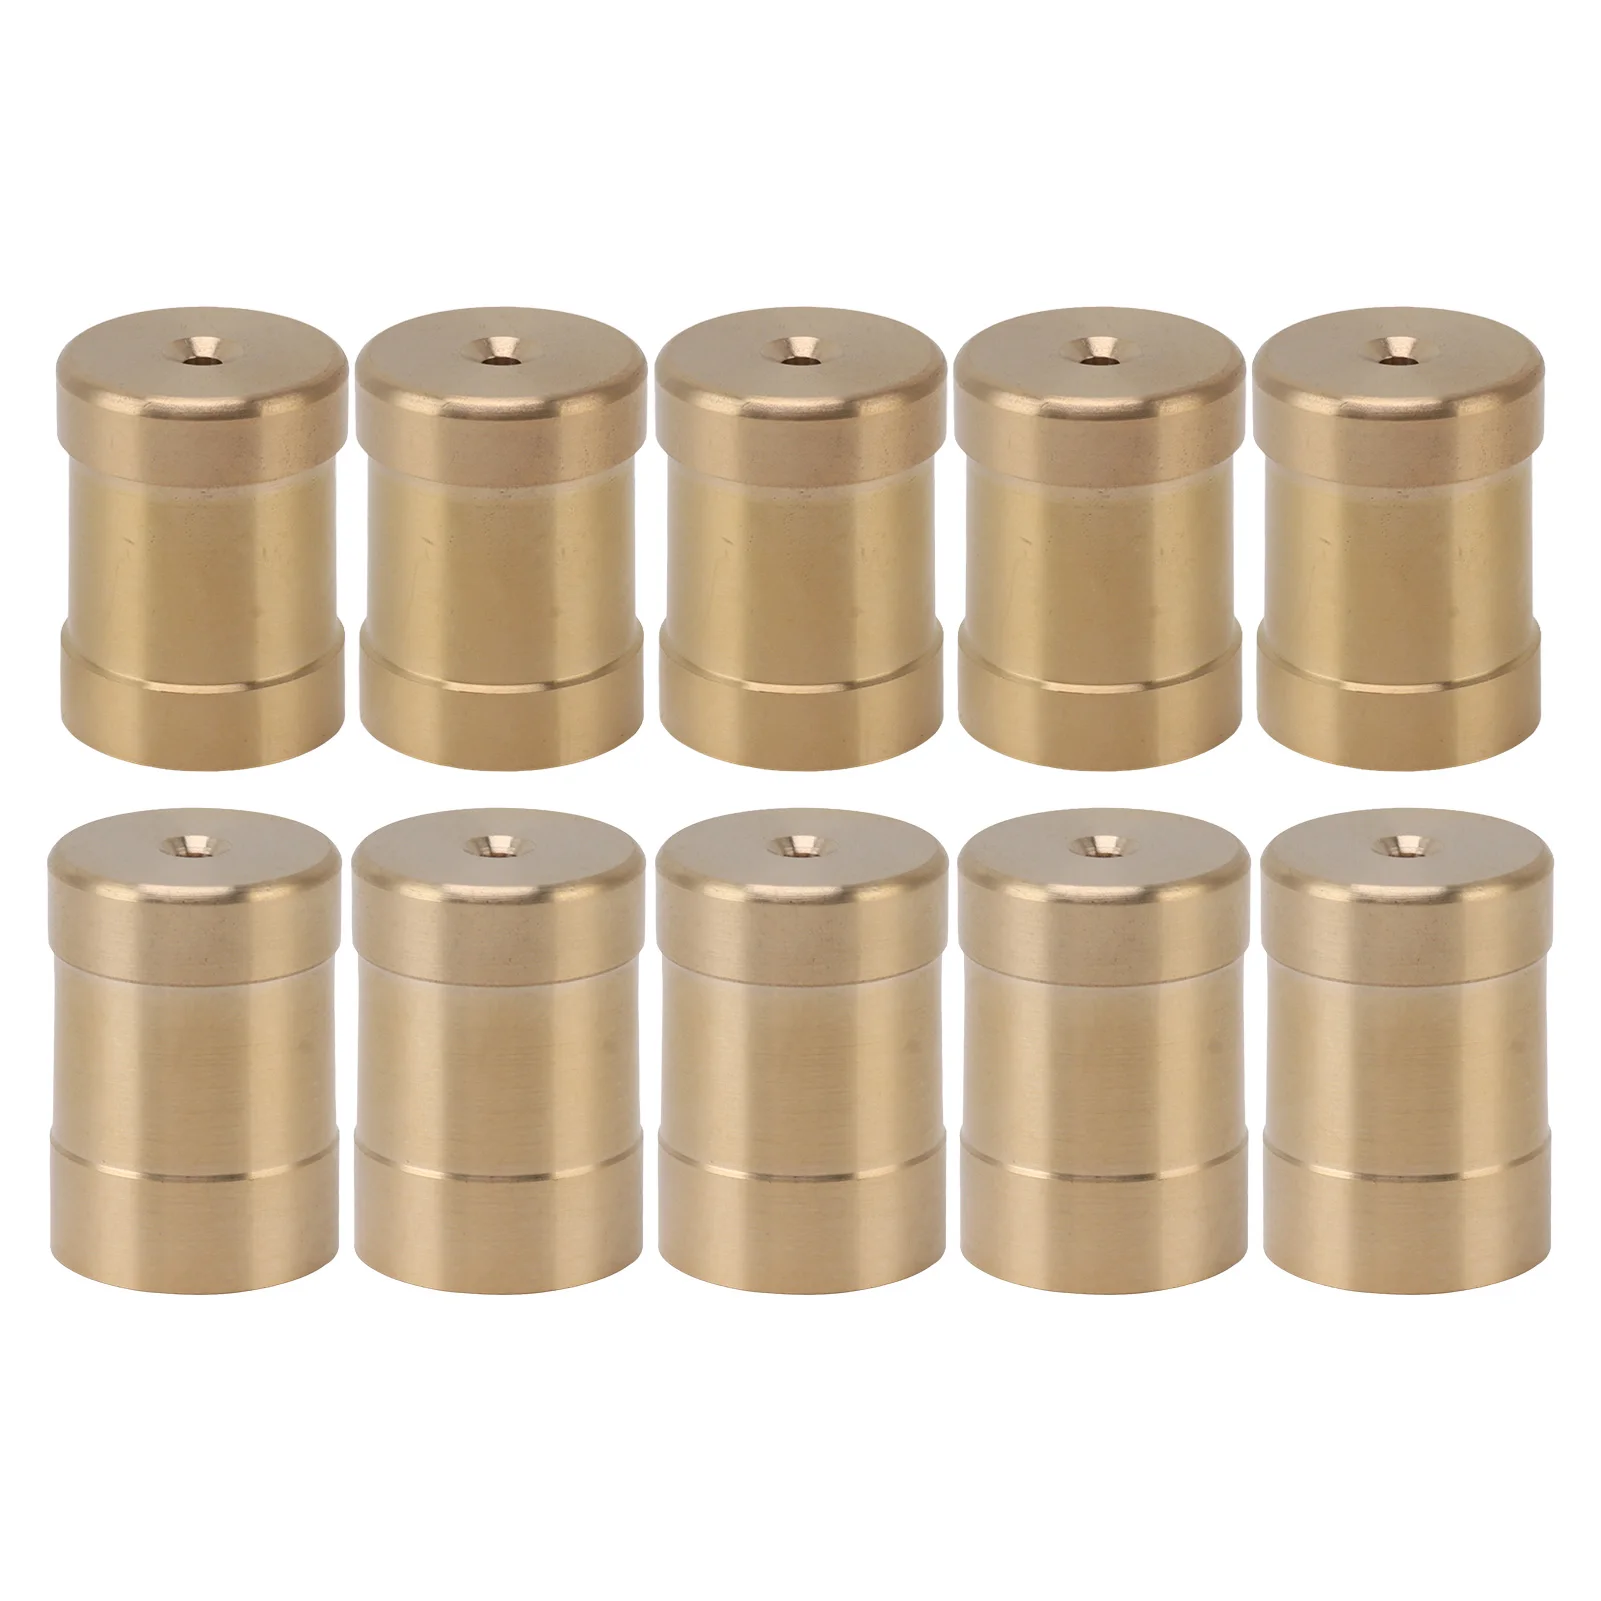 

5Pcs Copper Garden Misting Nozzle Flat Head Spray Misting Nozzle Internal Thread Connection for Watering Irrigation Sprinkler